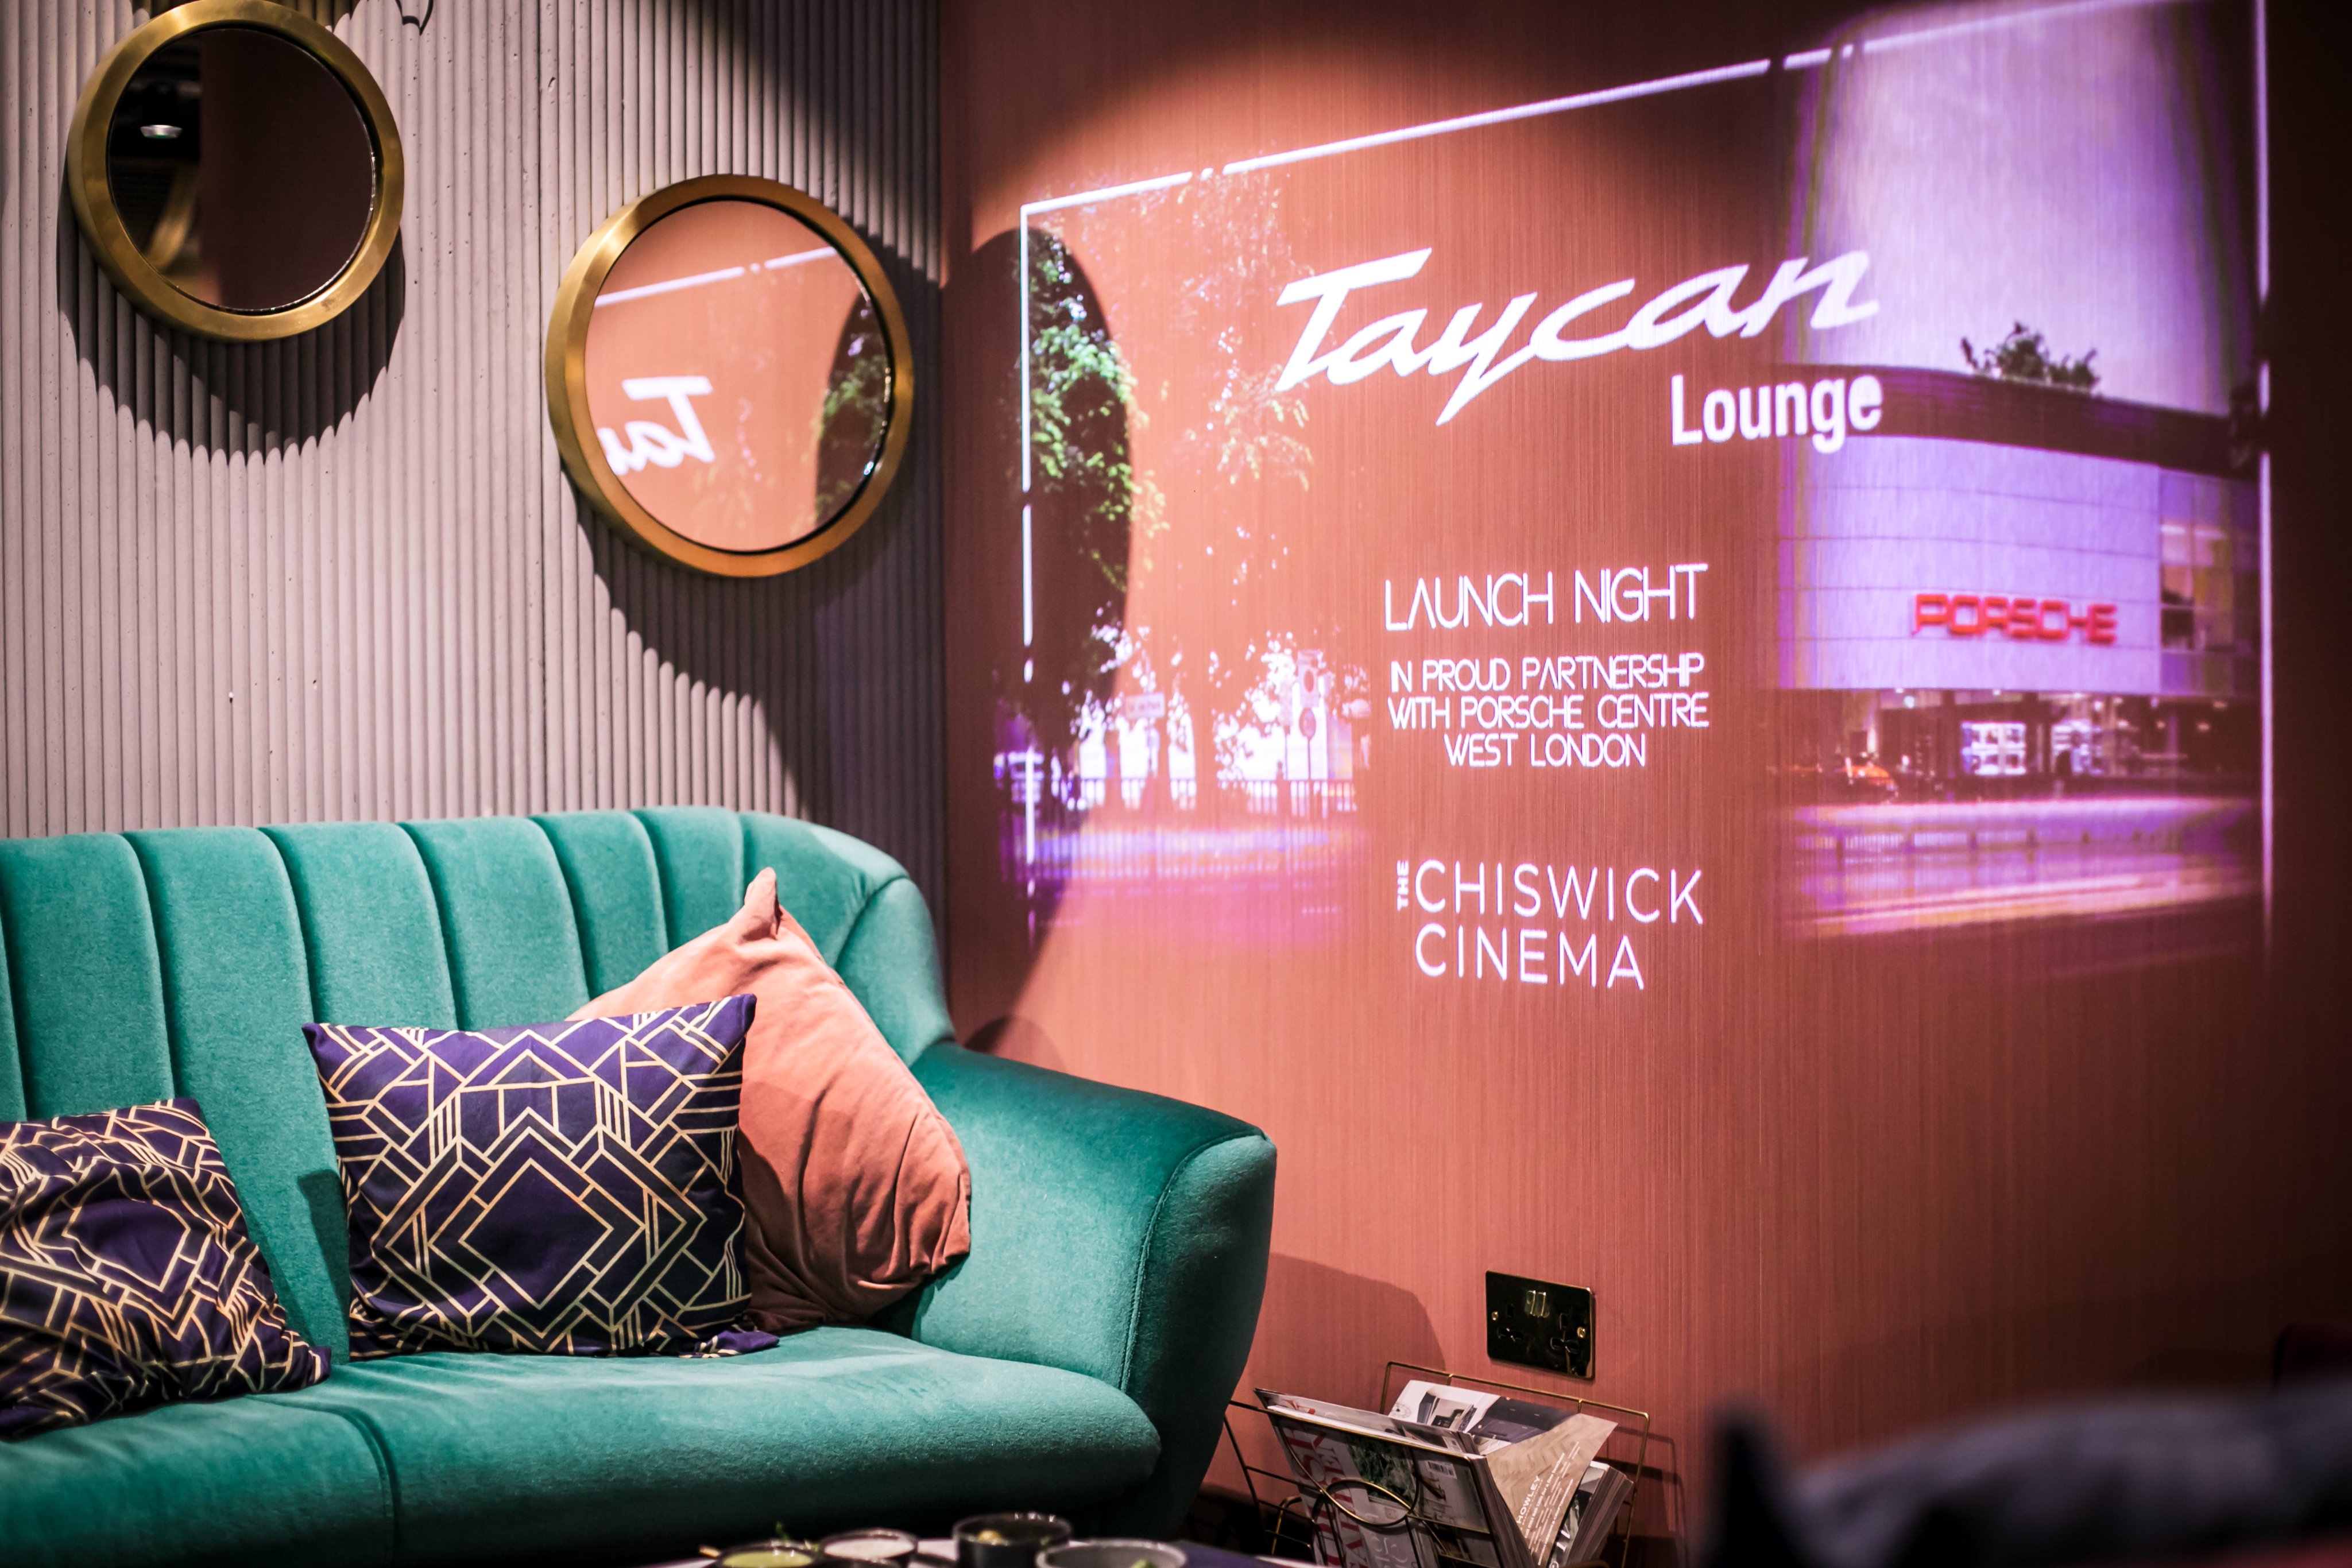 Two Years of the Chiswick Cinema - Taycan Lounge Launch Night